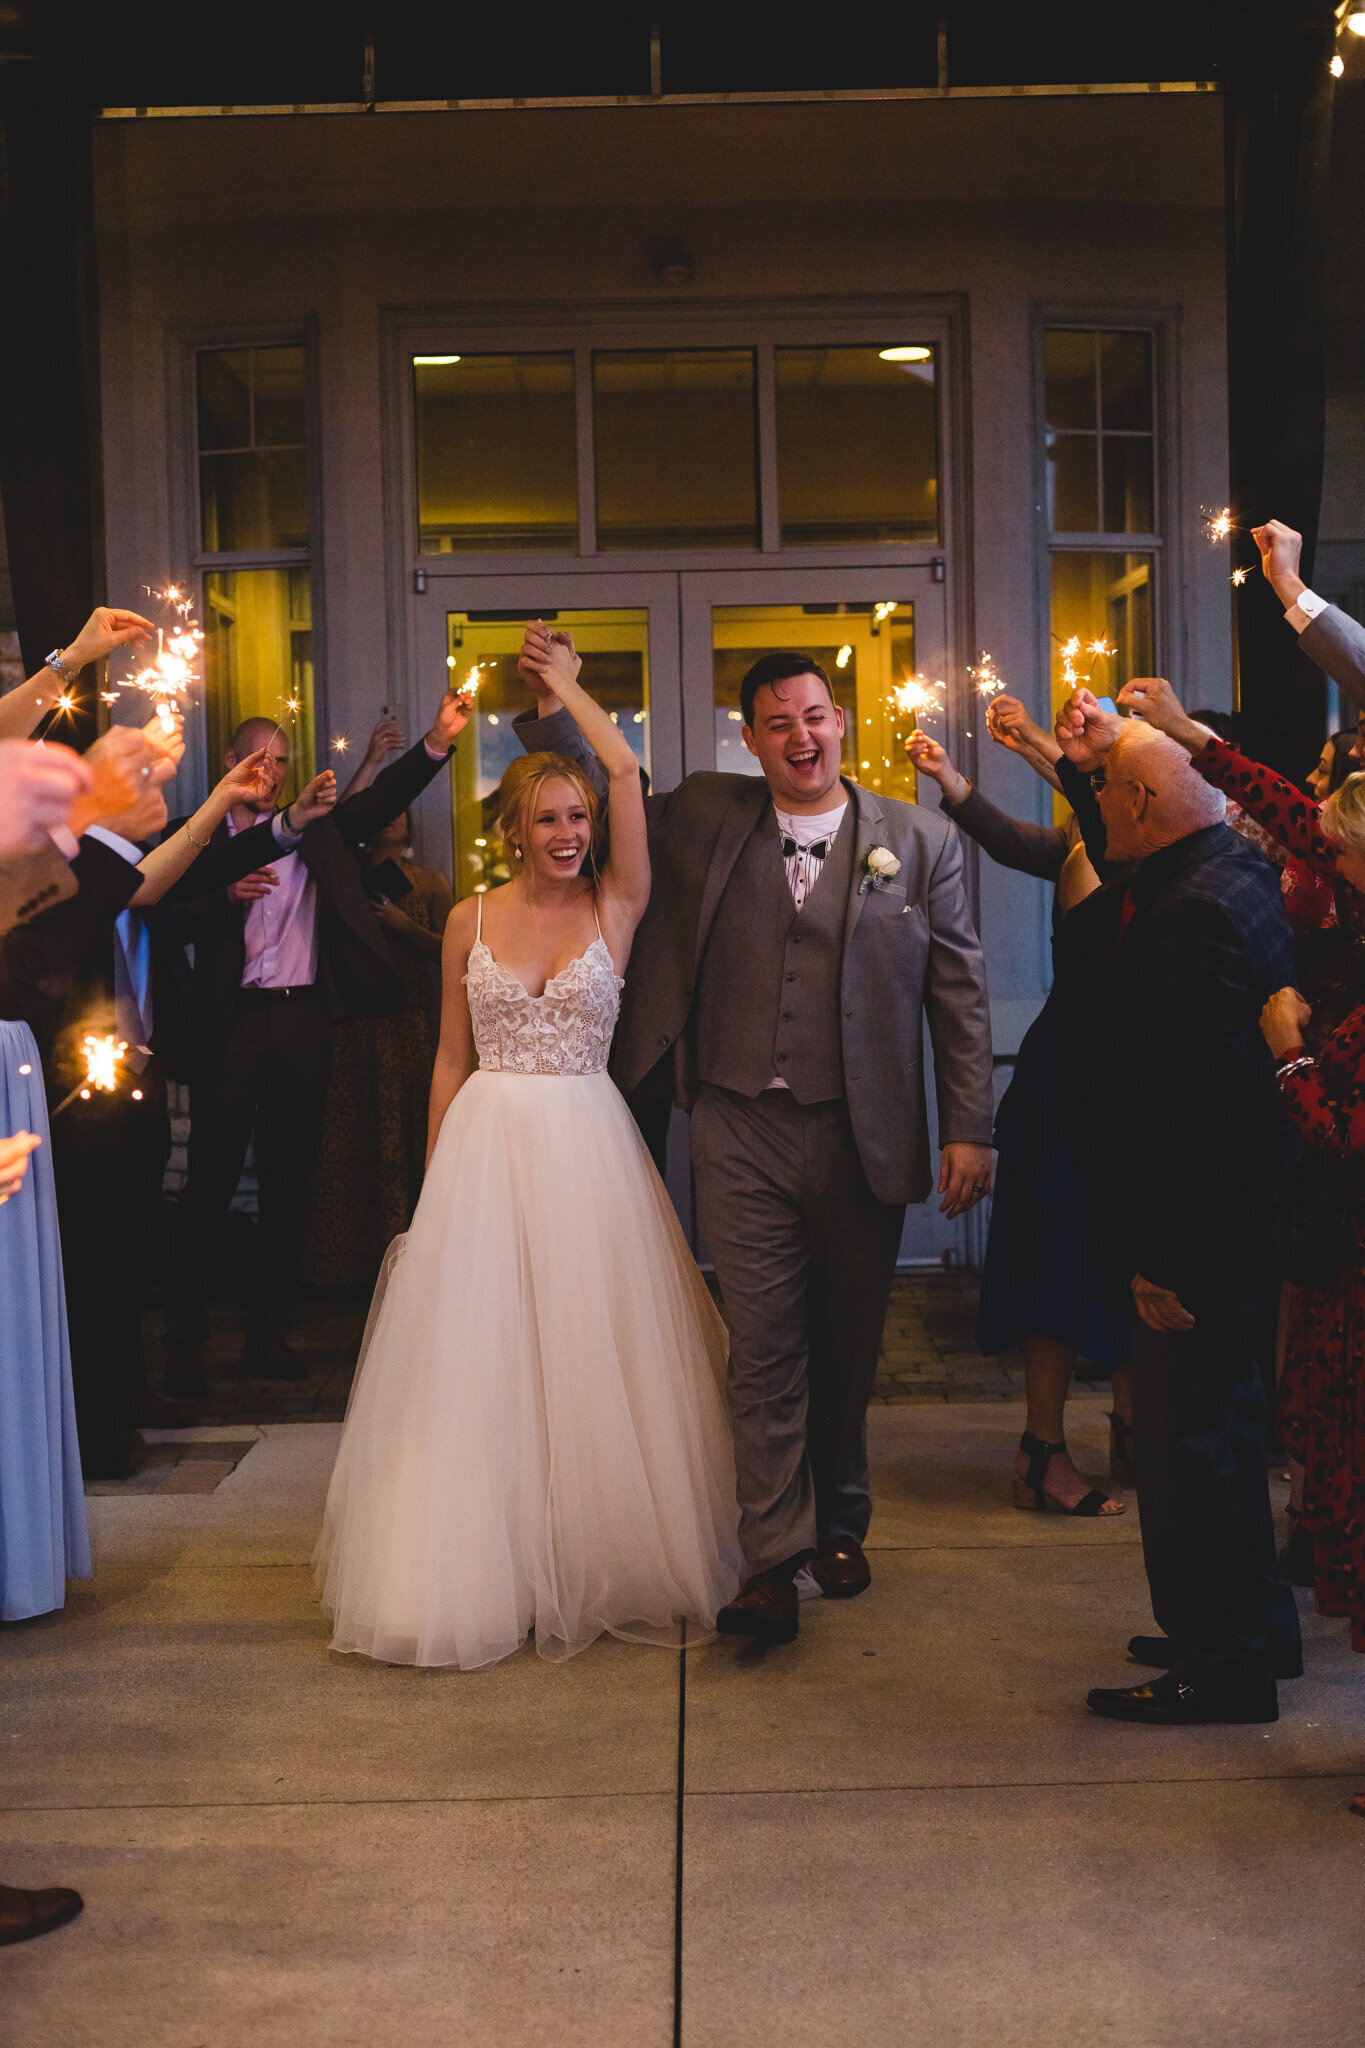 sparkler send off for bride and groom at ohio wedding